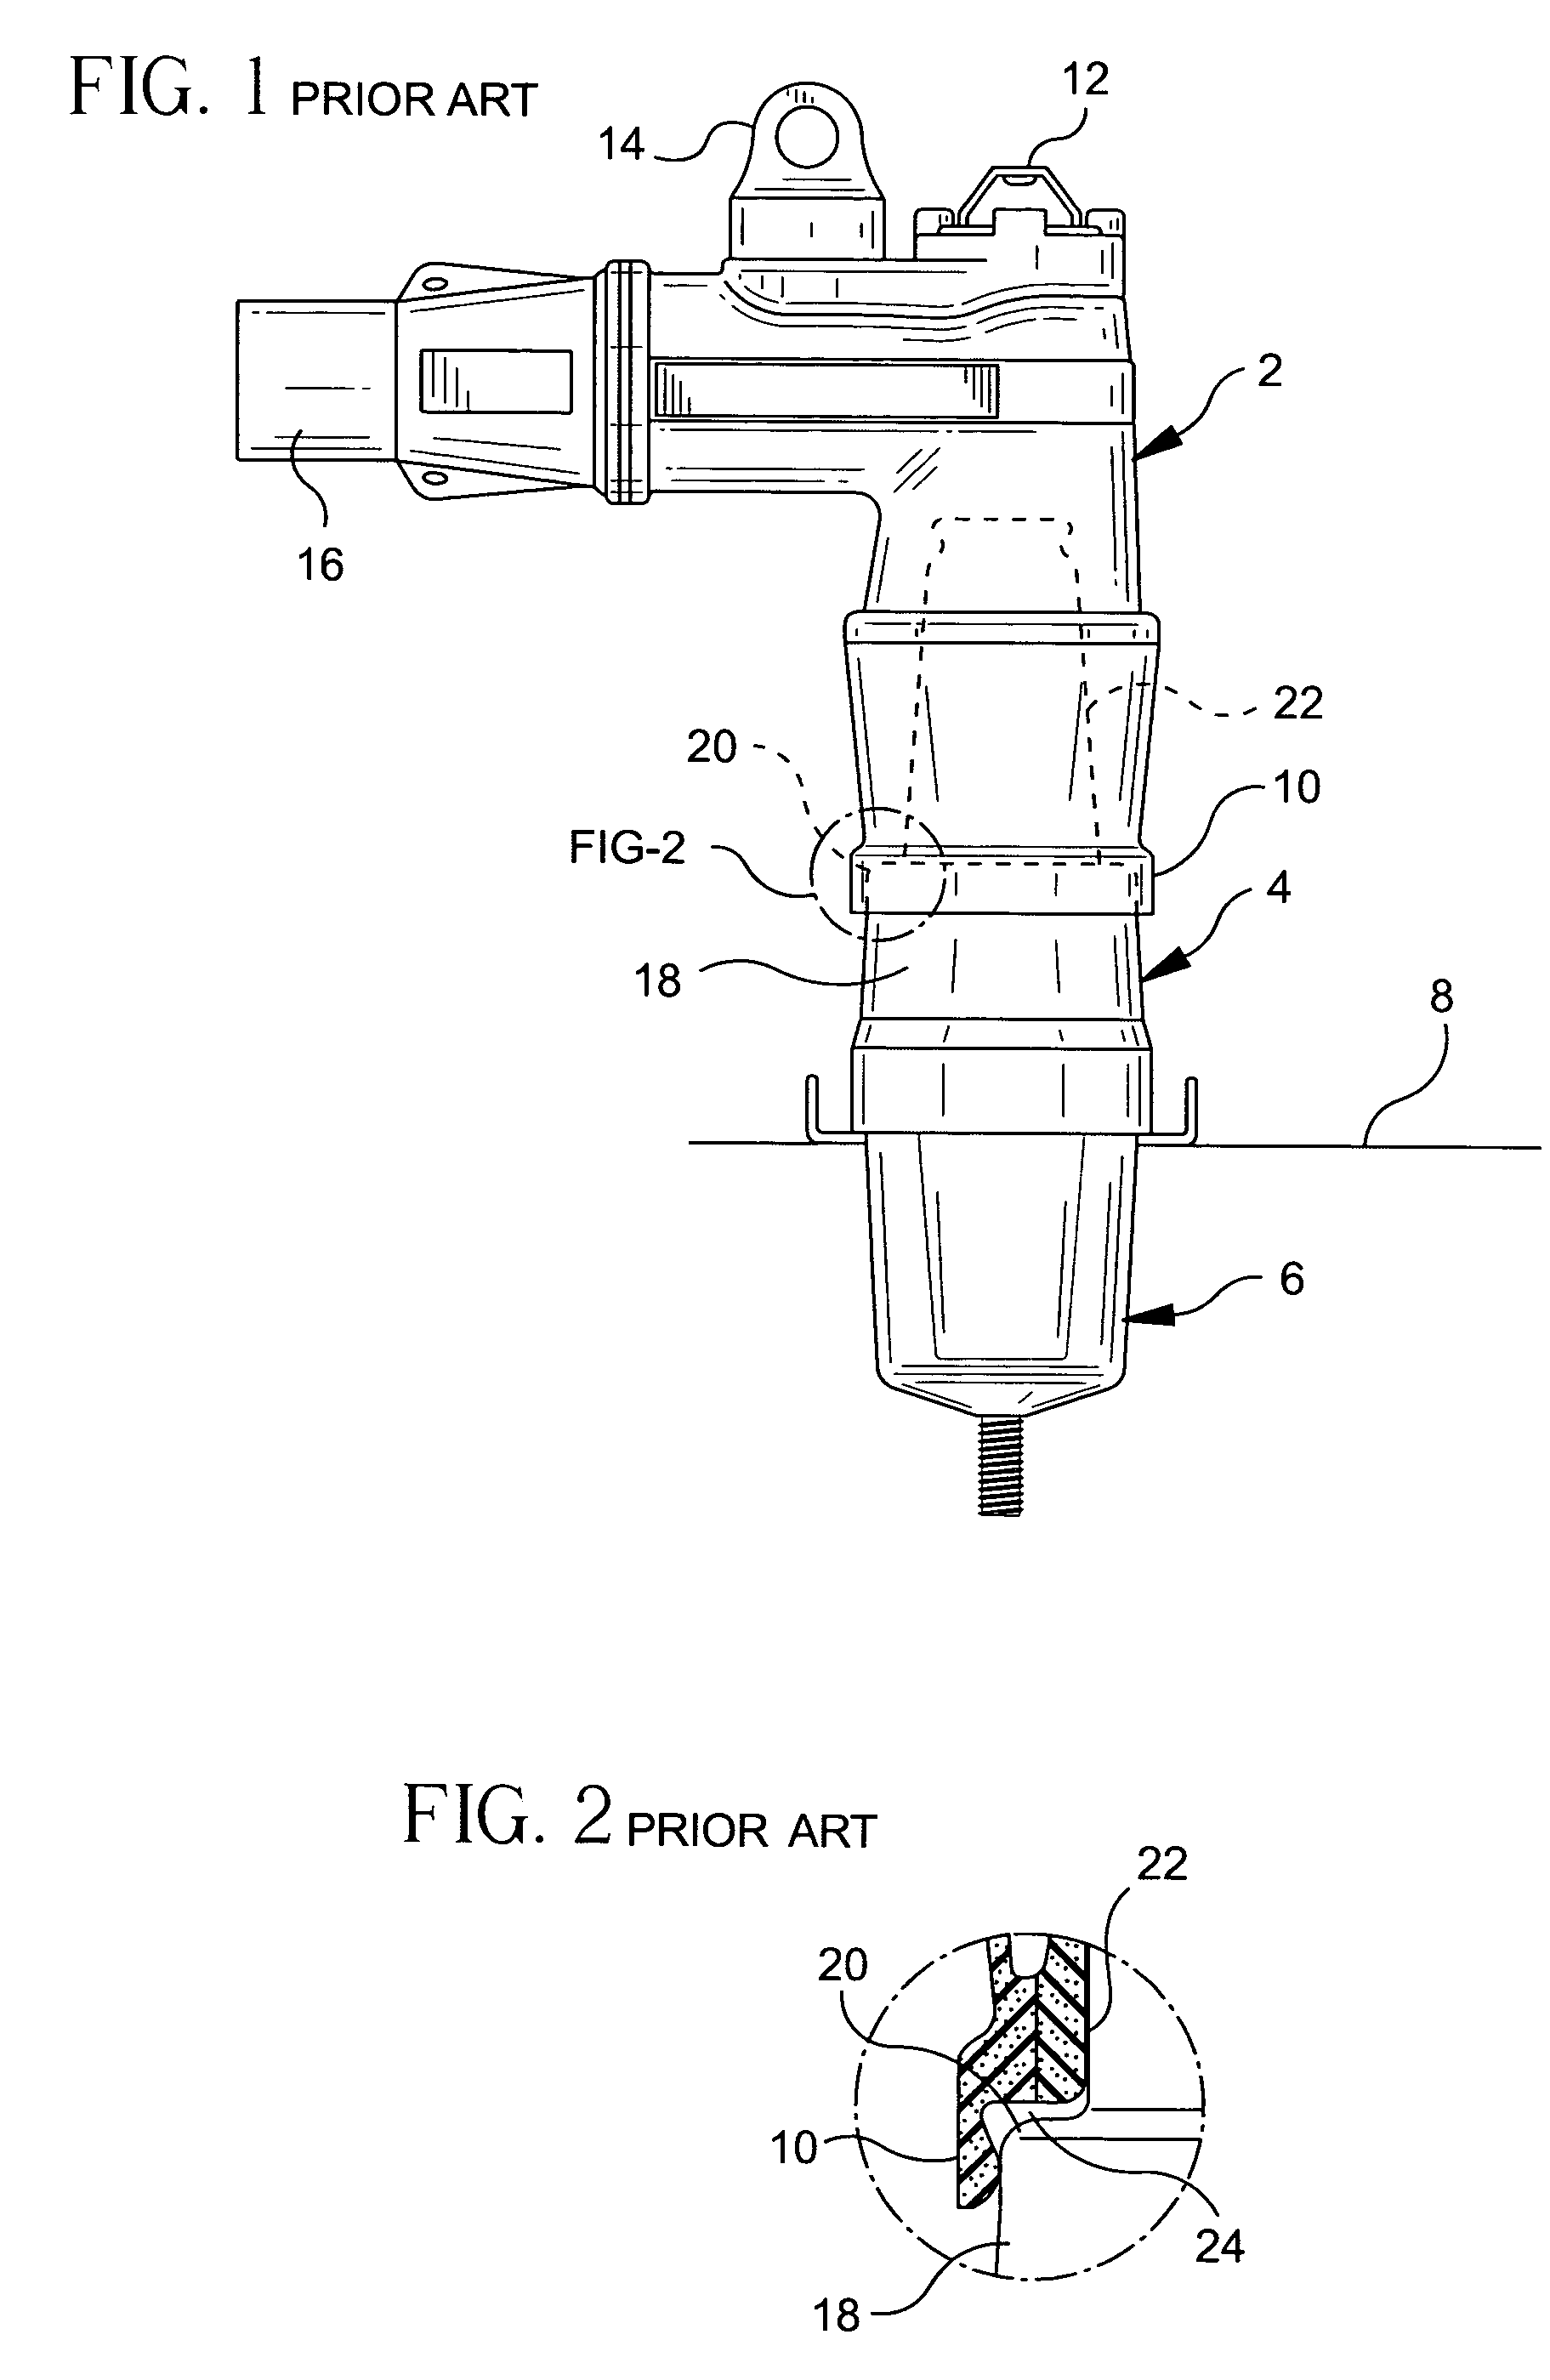 Separable electrical connector assembly